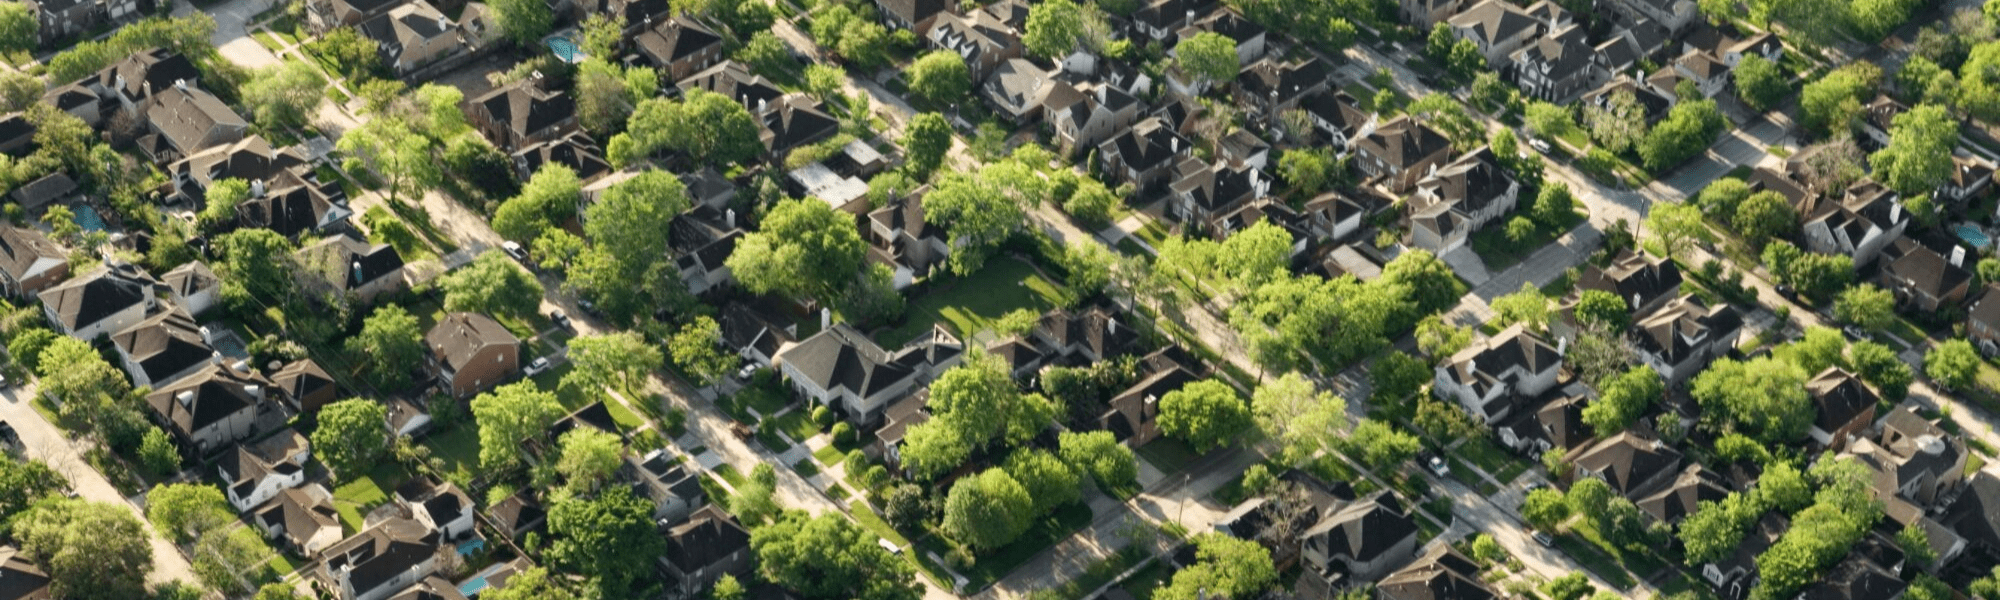 image of homes